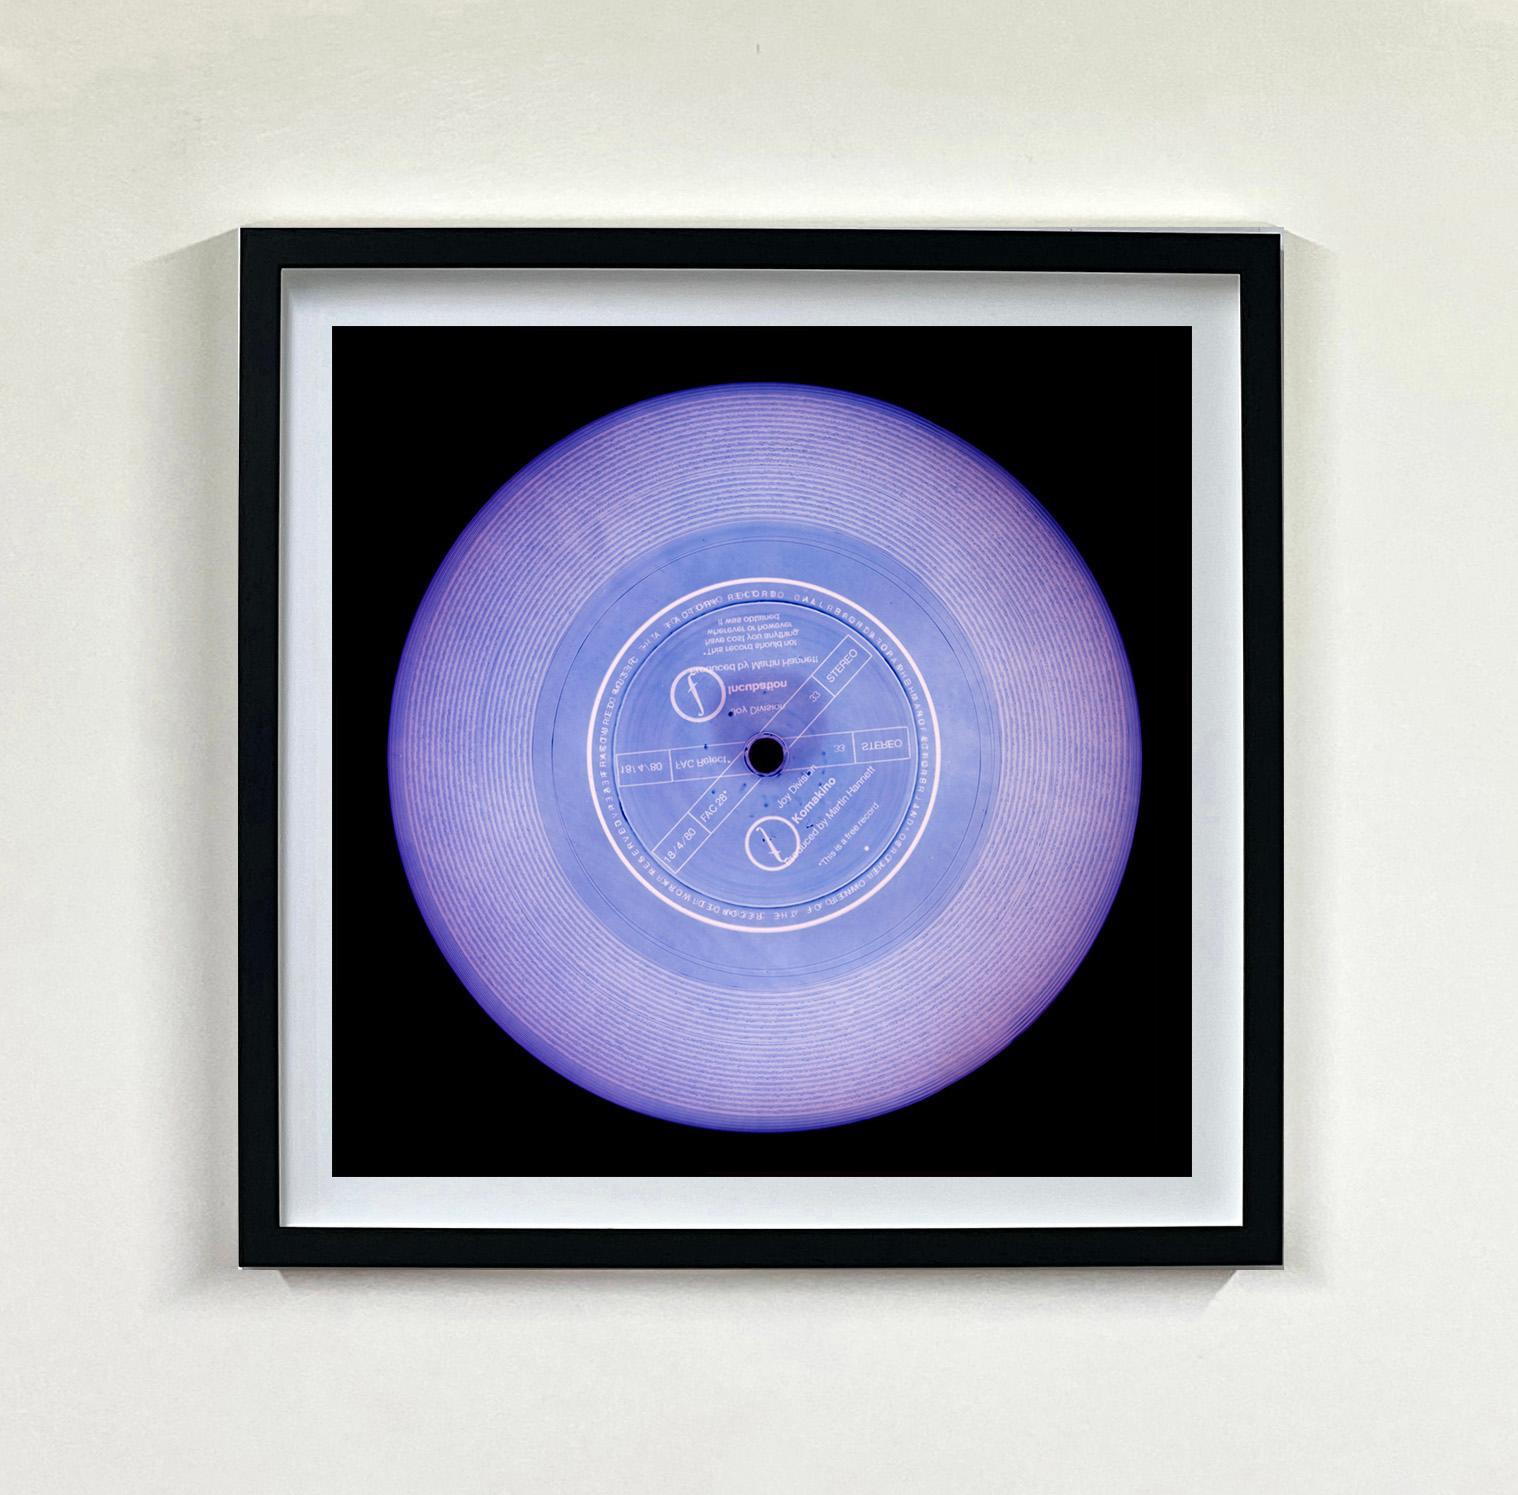 Heidler & Heeps Vinyl Collection Twenty Piece Multi-Color Installation.
Acclaimed contemporary photographers, Richard Heeps and Natasha Heidler have collaborated to make this beautifully mesmerising collection. A celebration of the vinyl record and